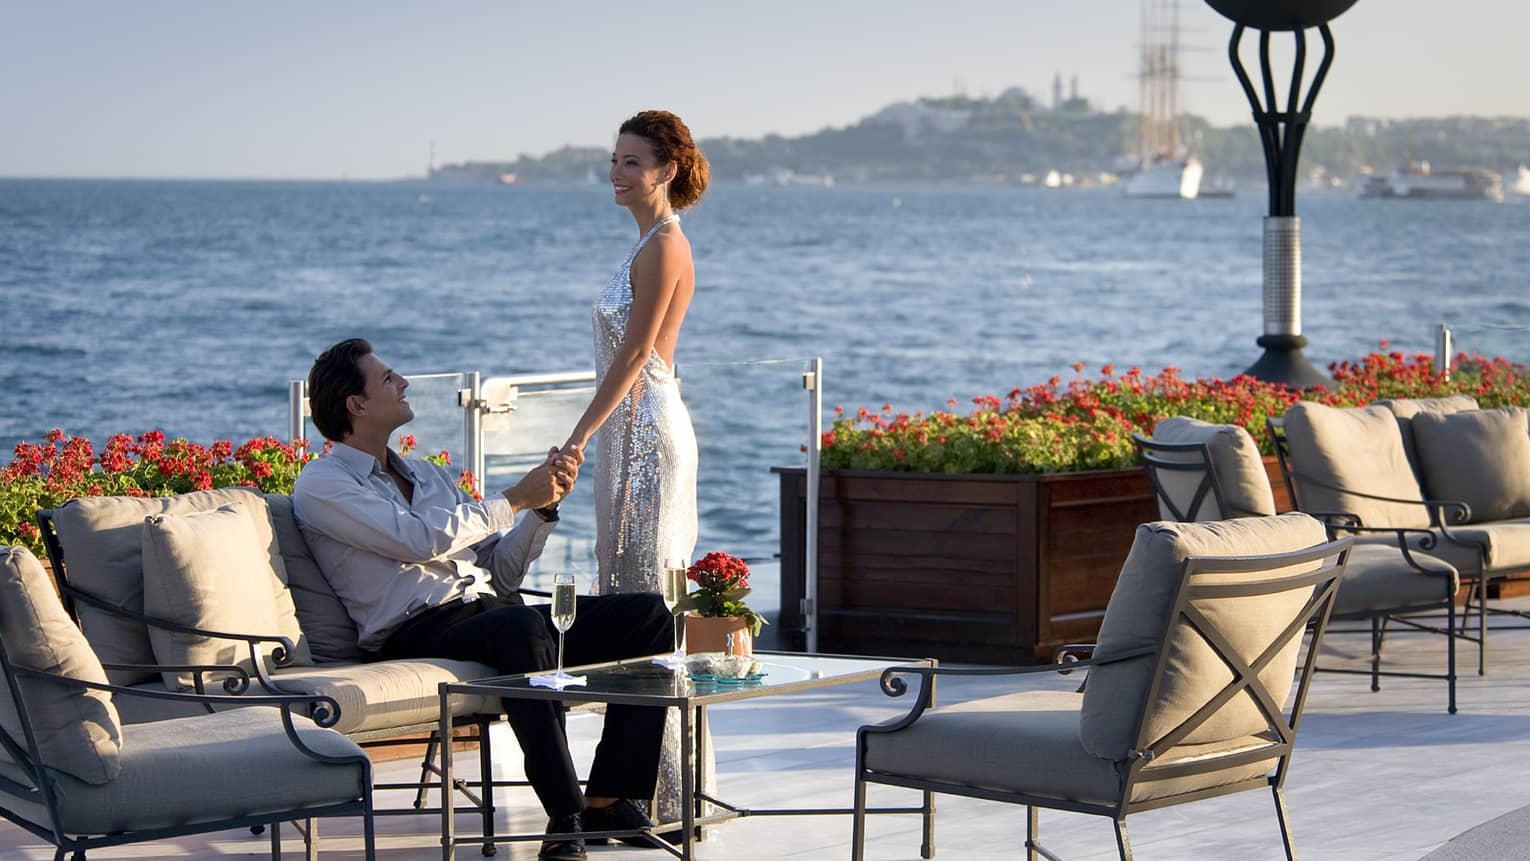 Woman stands over man on patio lounge chair by table with Champagne, water 